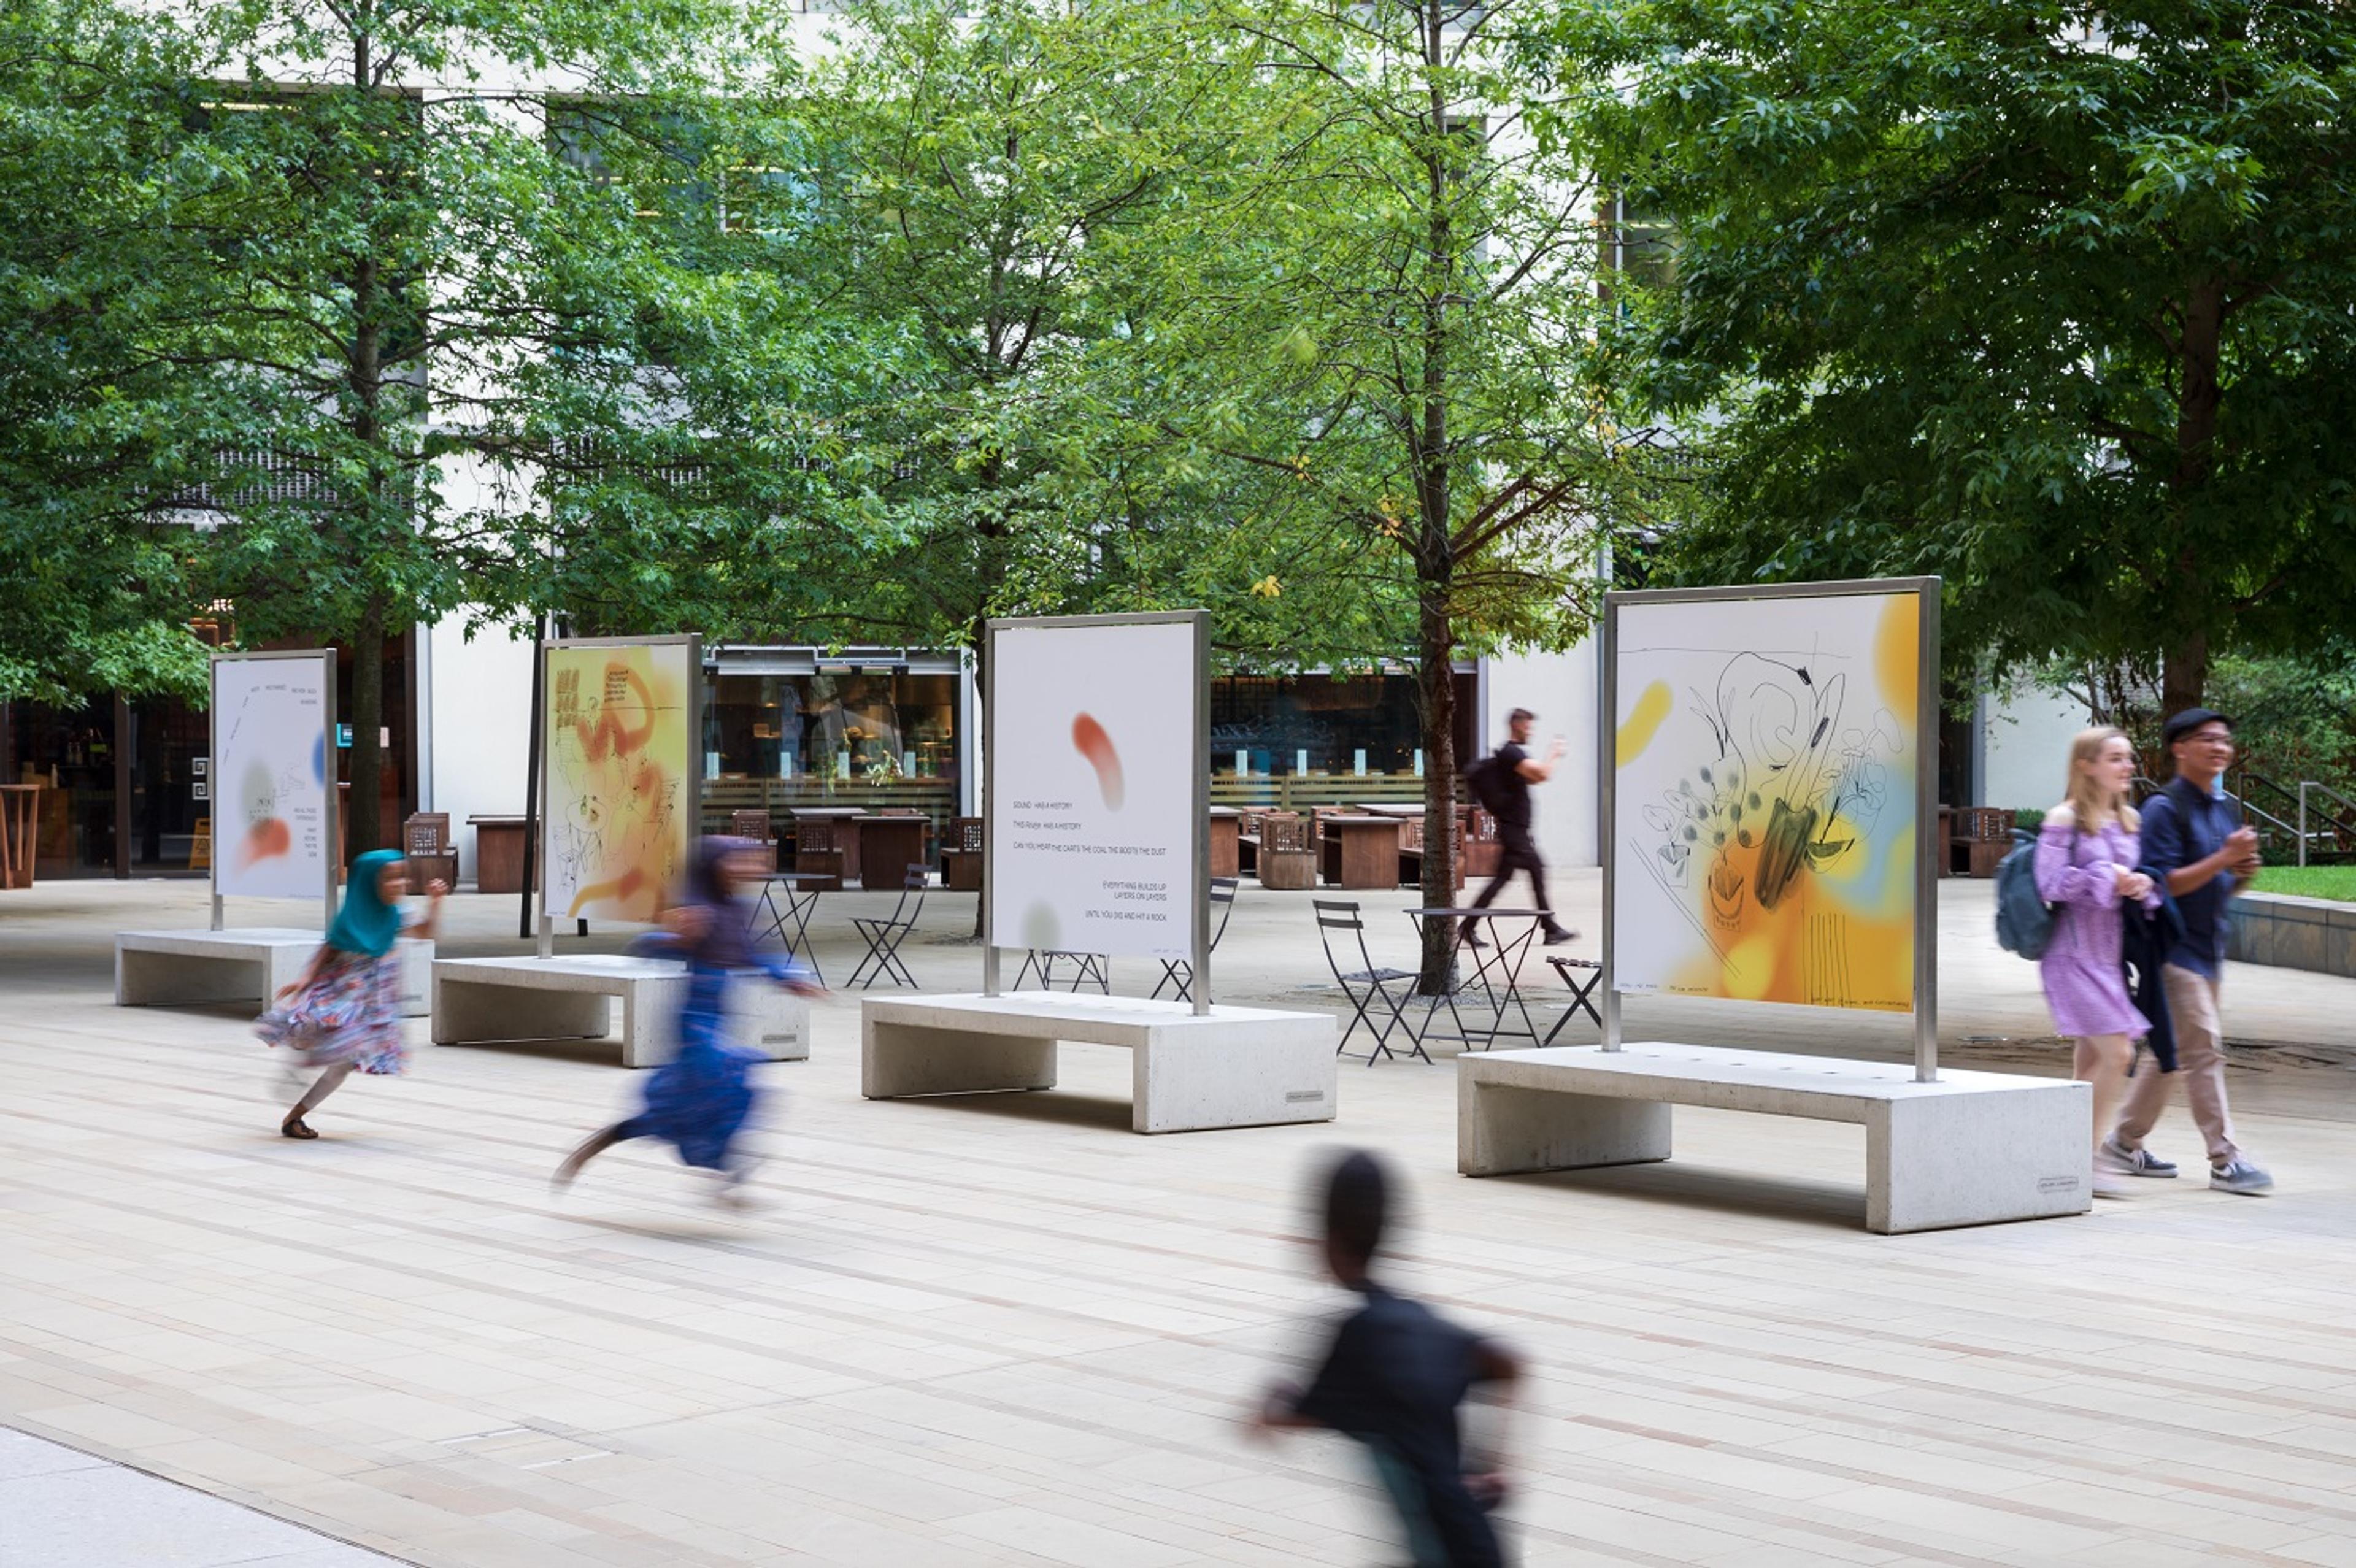 Freestanding large scale prints installed outdoors with trees in the background and children running in the foreground